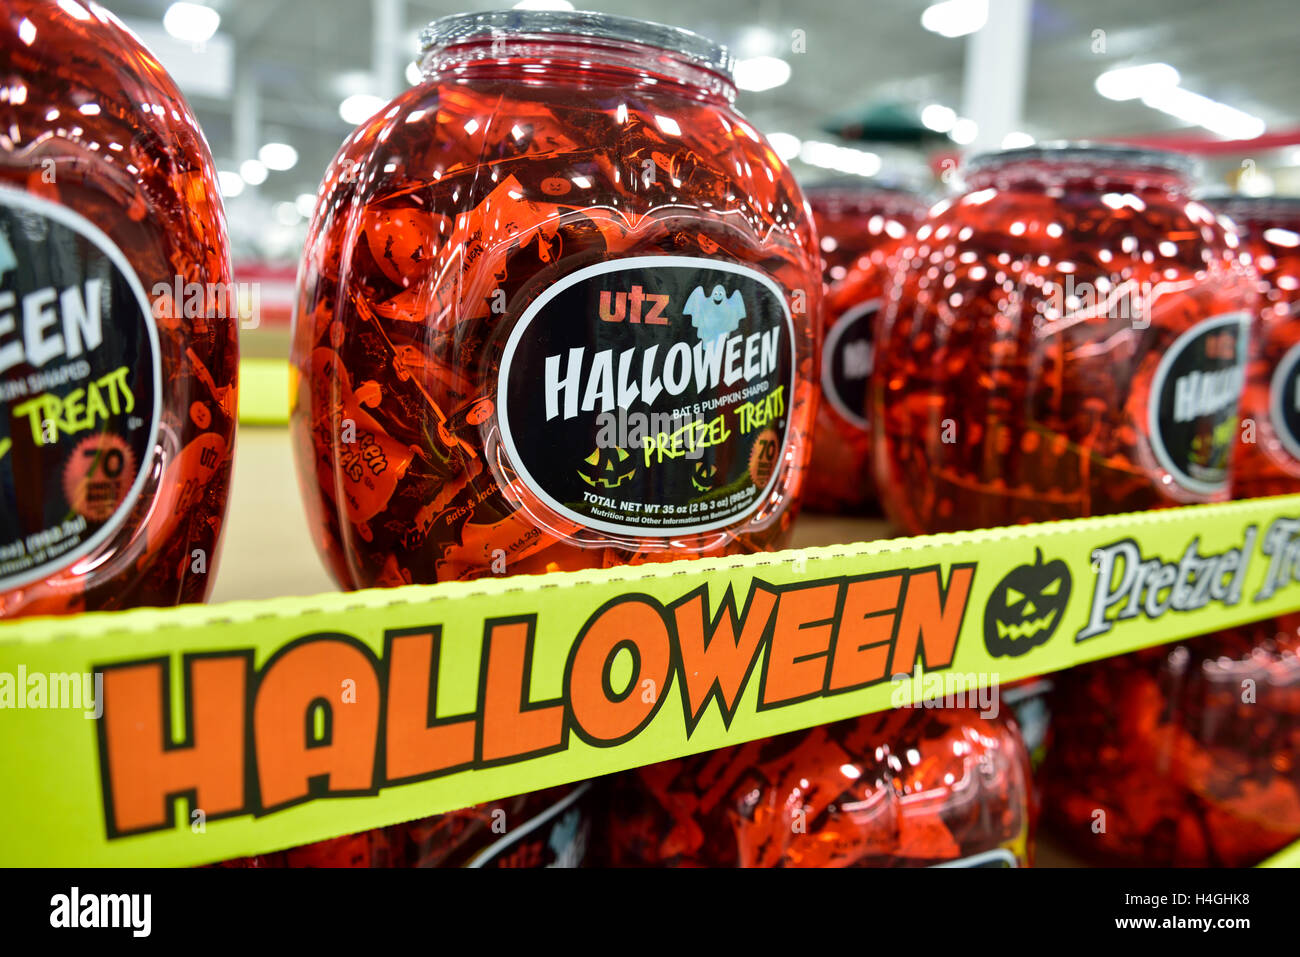 Treats For Sale On Display For Halloween In Supermarket Stock Photo Alamy